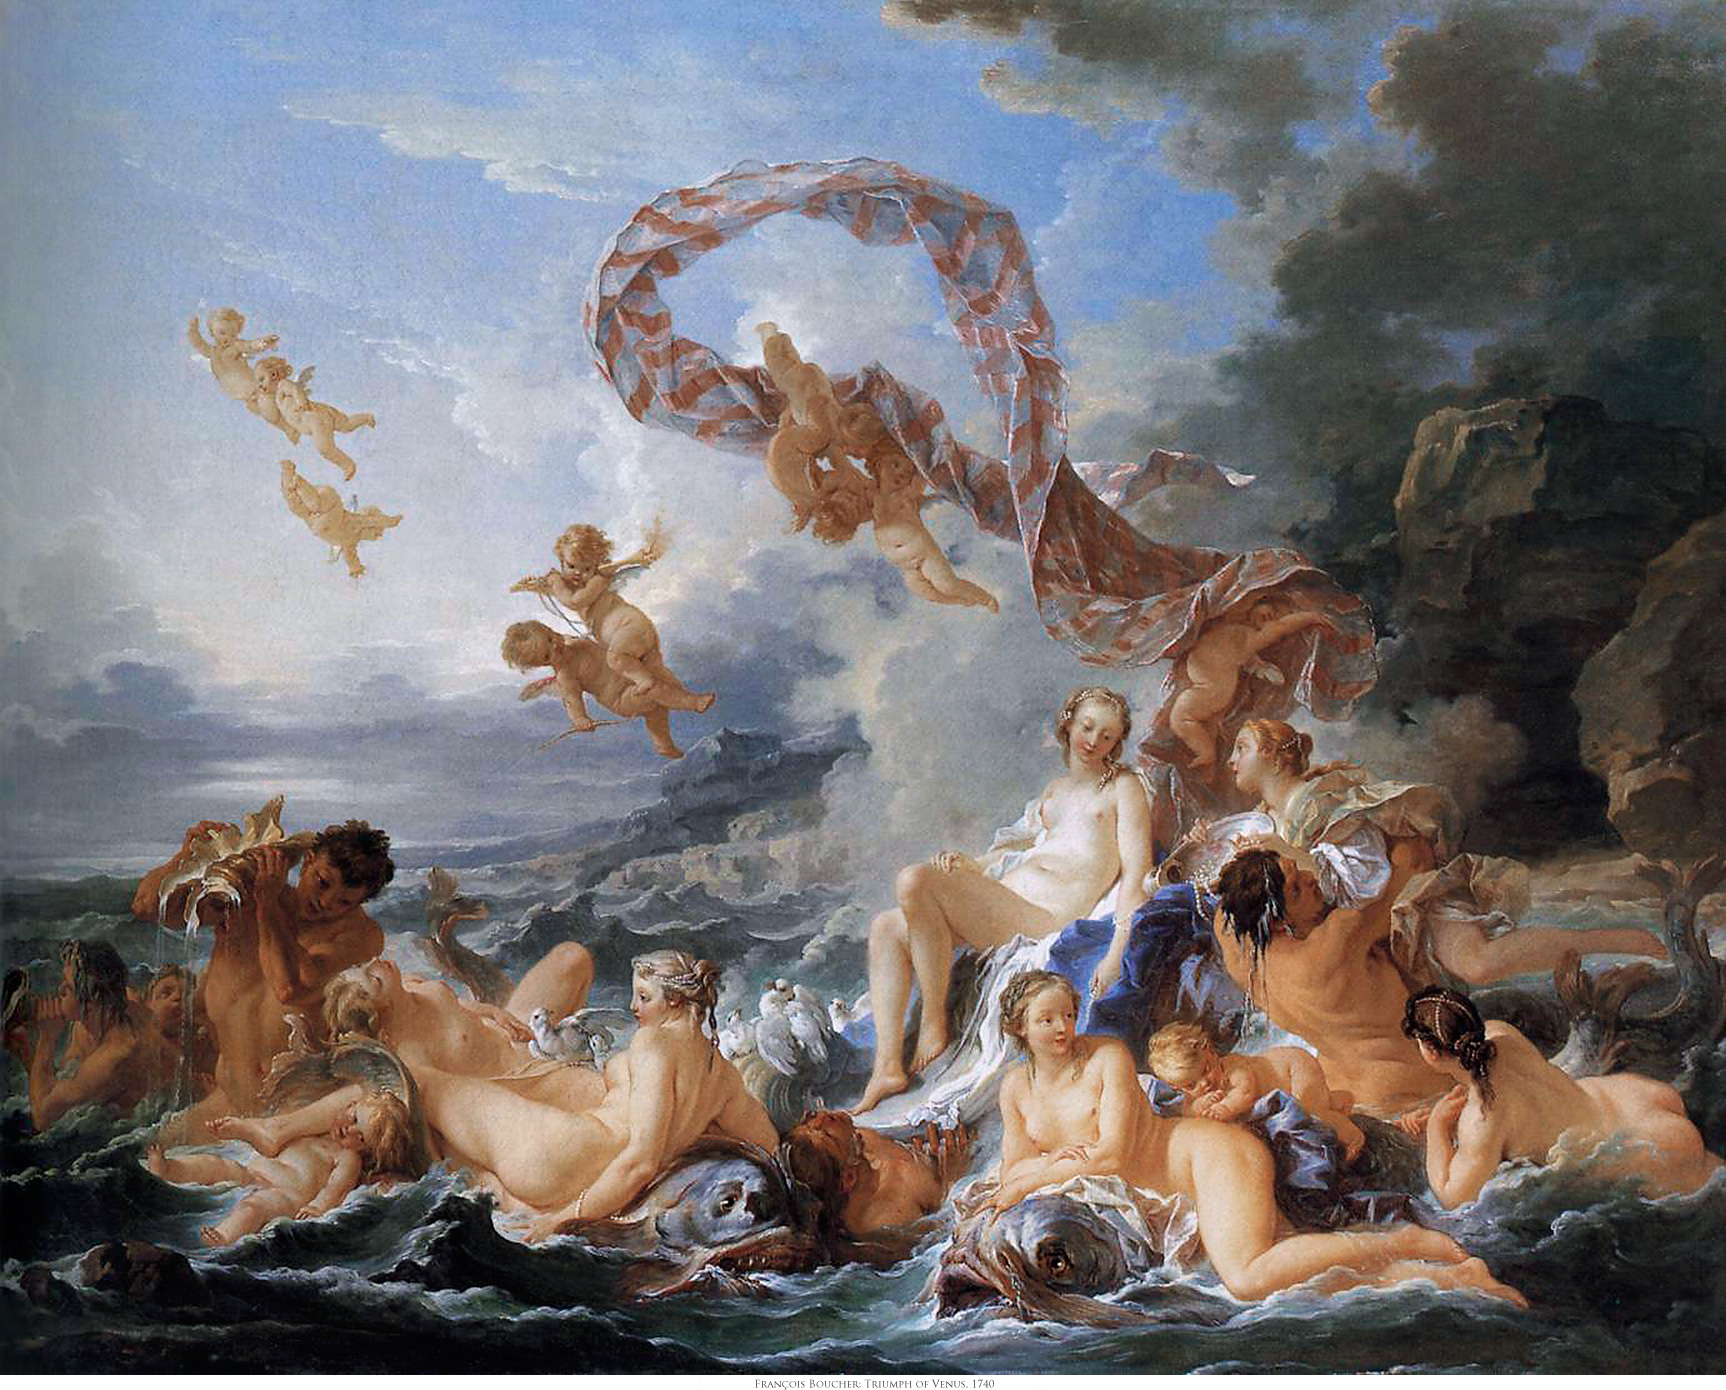 The Birth and Triumph of Venus by Francois Boucher - 1740 - 130 x 162 cm Nationalmuseum